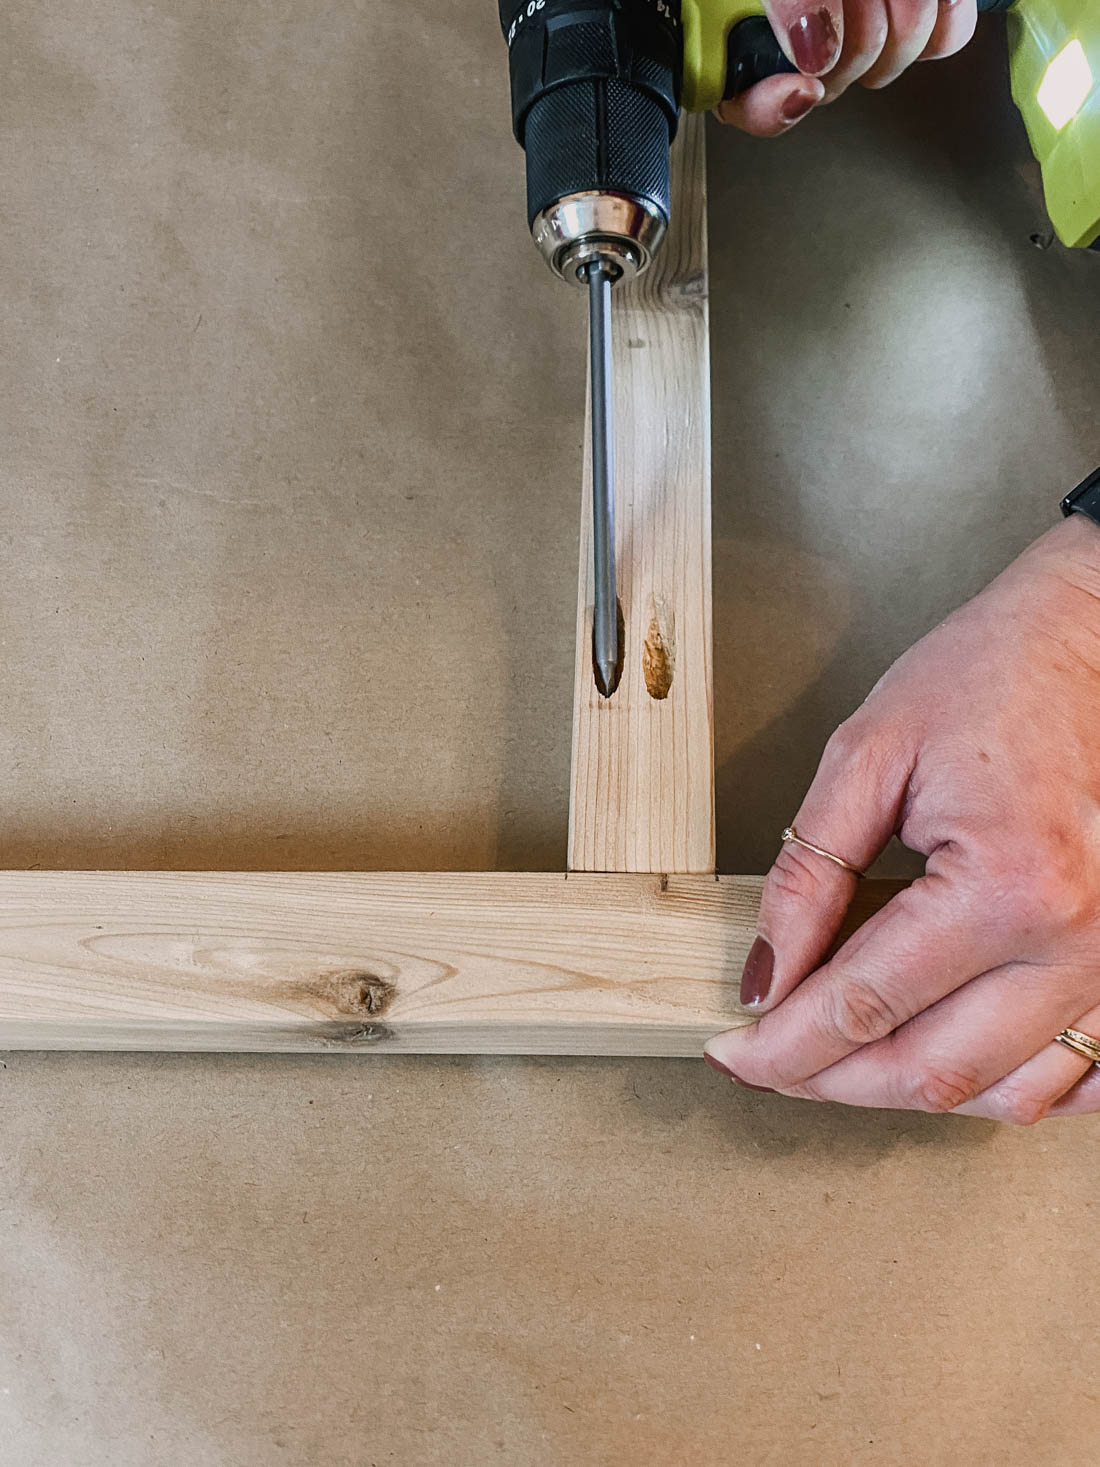 How to use a Kreg Jig for a Blanket Ladder